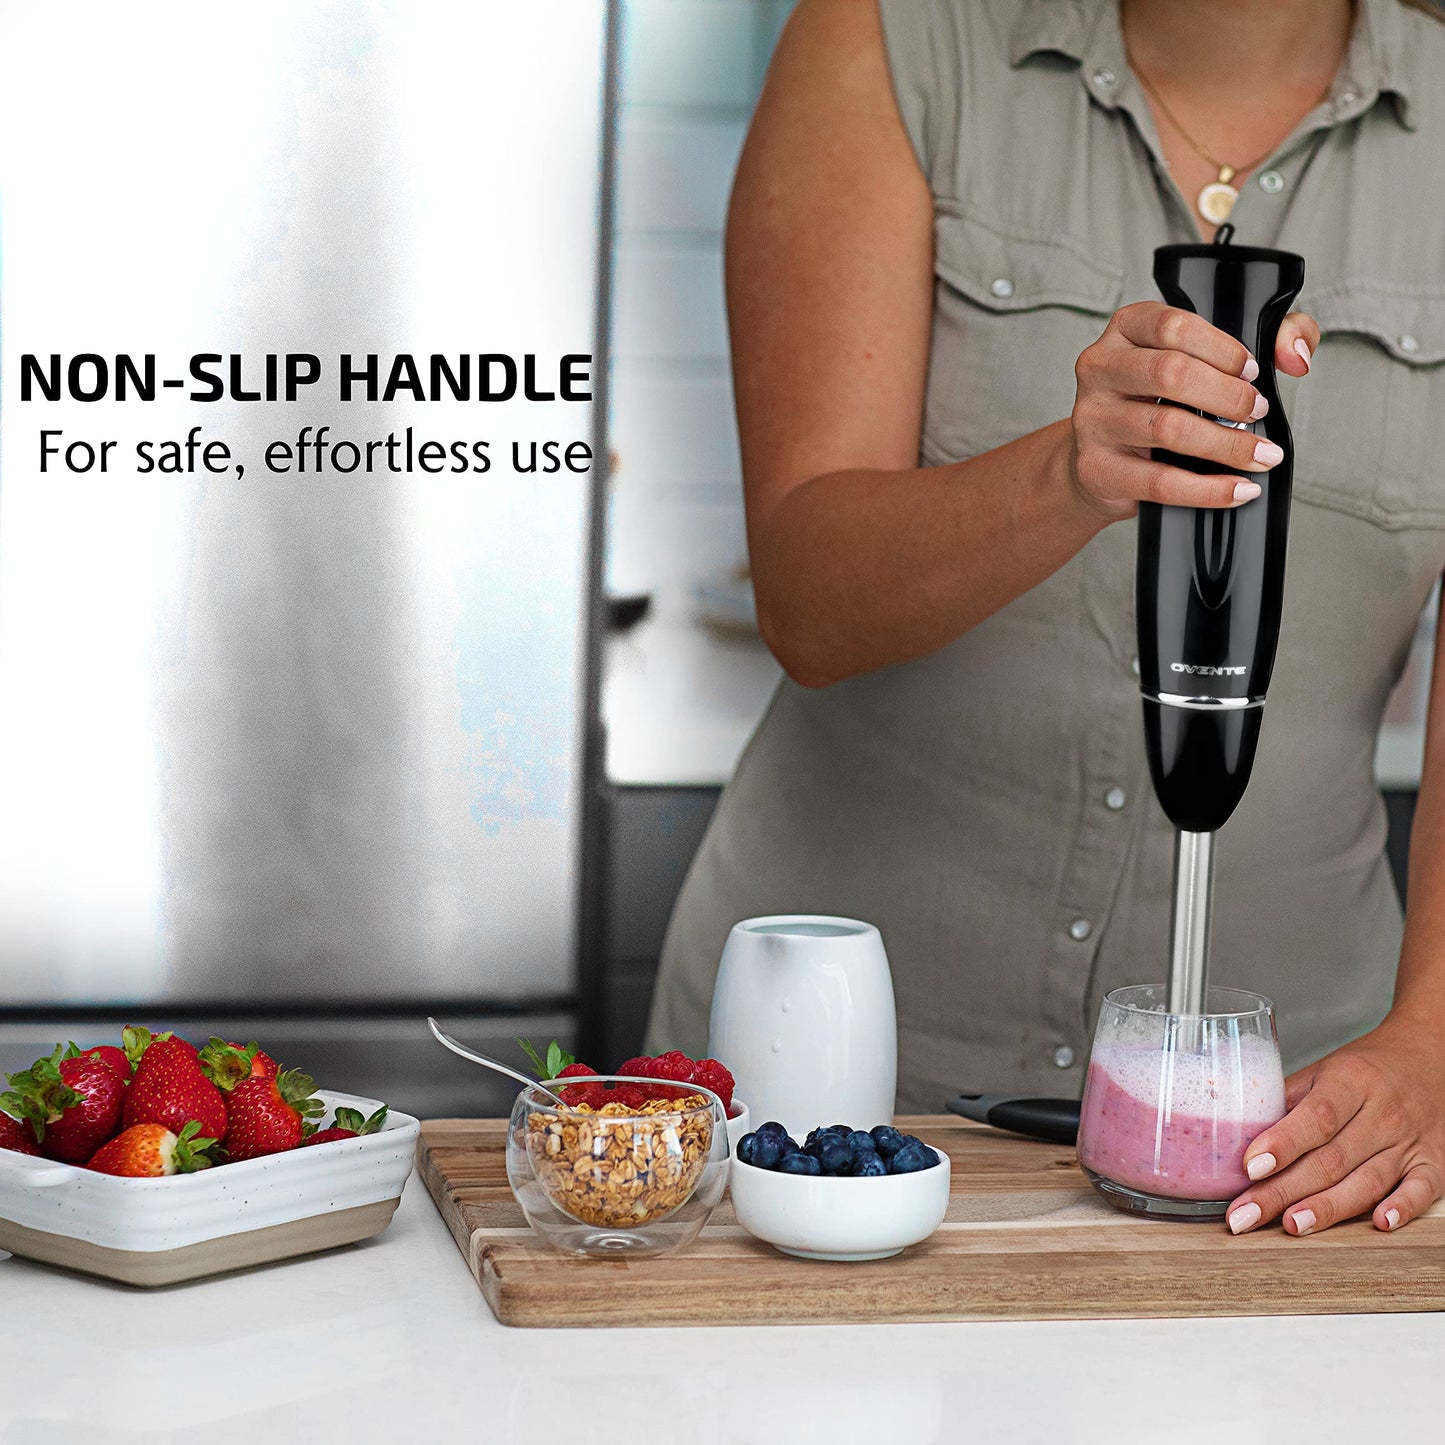 OVENTE Electric Immersion Hand Blender 300 Watt 2 Mixing Speed with Stainless Steel Blades, Powerful Portable Easy Control Grip Stick Mixer Perfect for Smoothies, Puree Baby Food & Soup, Black HS560B